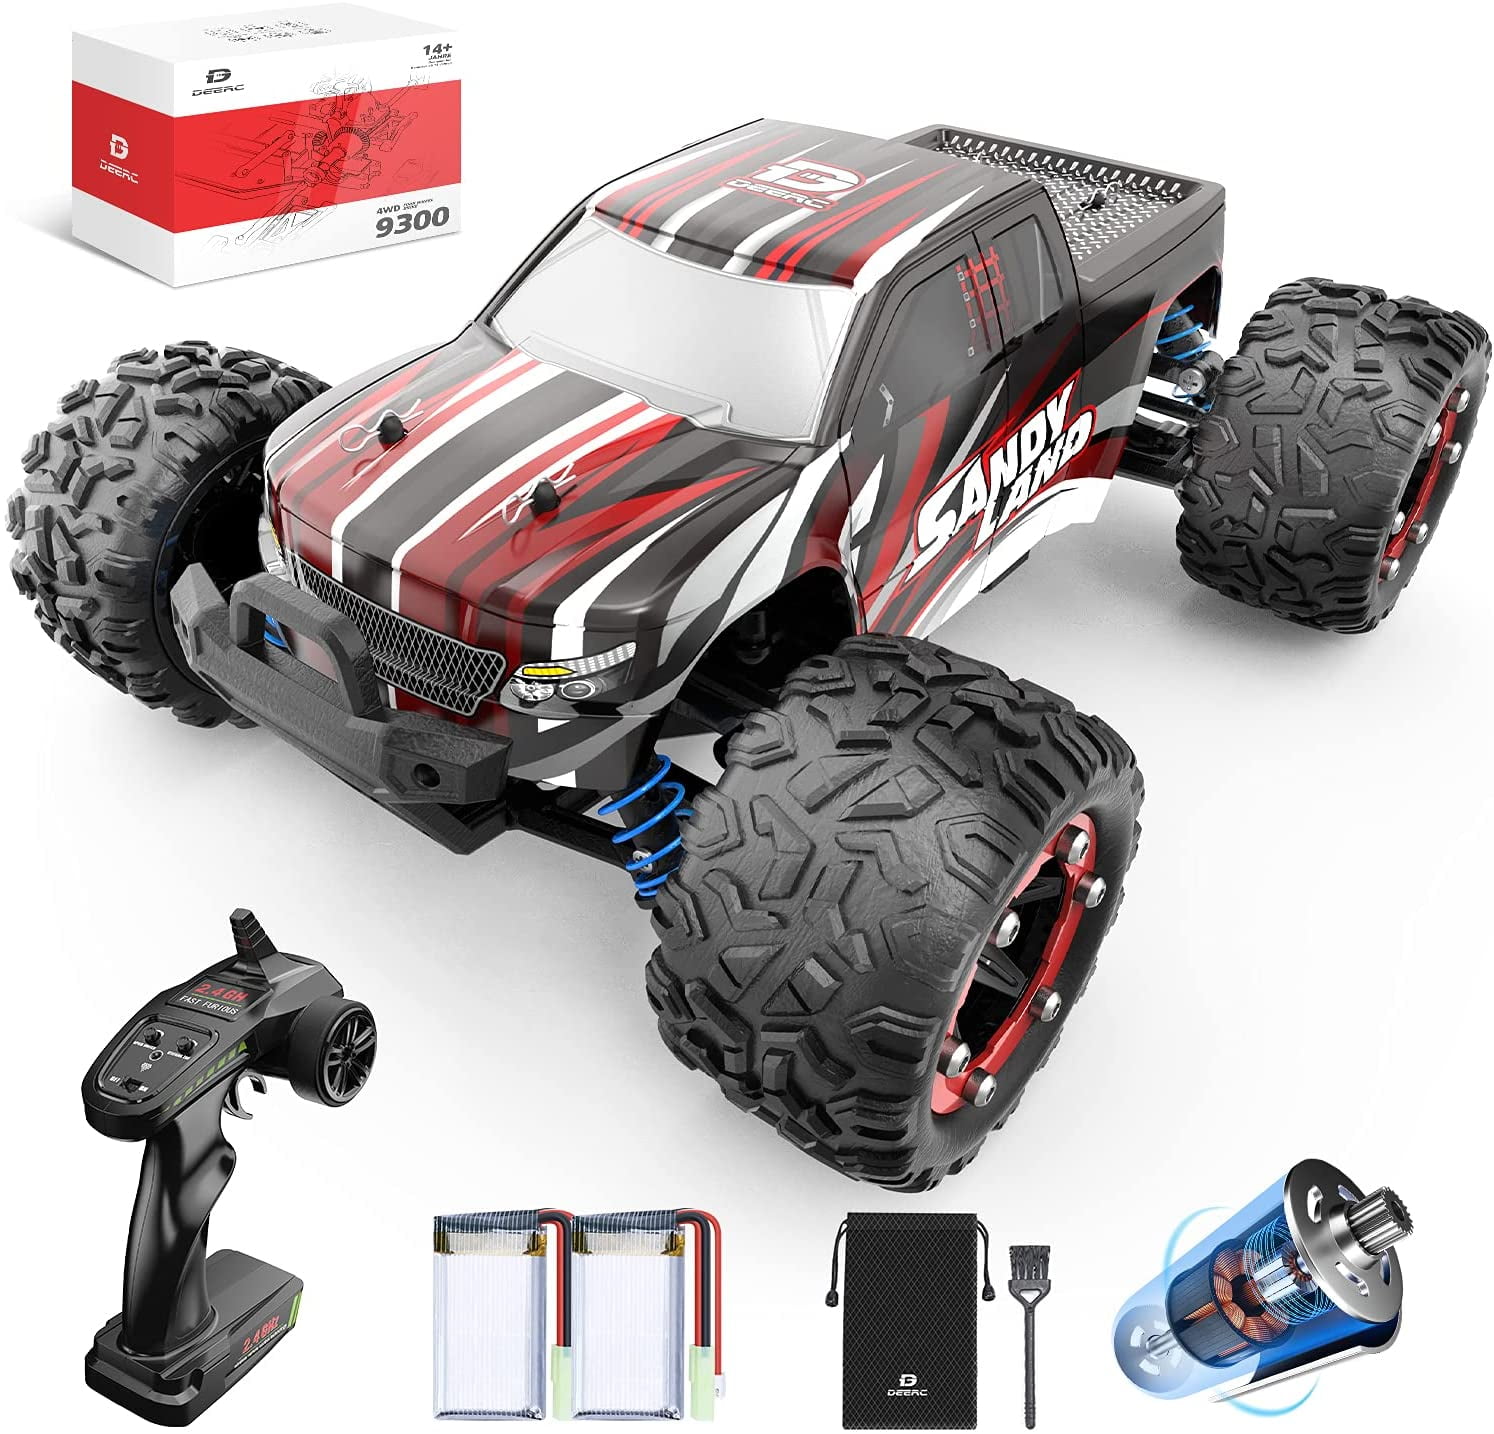 1/18 Scale Rc Trucks 4WD Off Road Racing Vehicle 2.4Ghz Radio Remote Control Car Rc Remote Control Cars High Speed Electric Vehicle for Kids Adults 